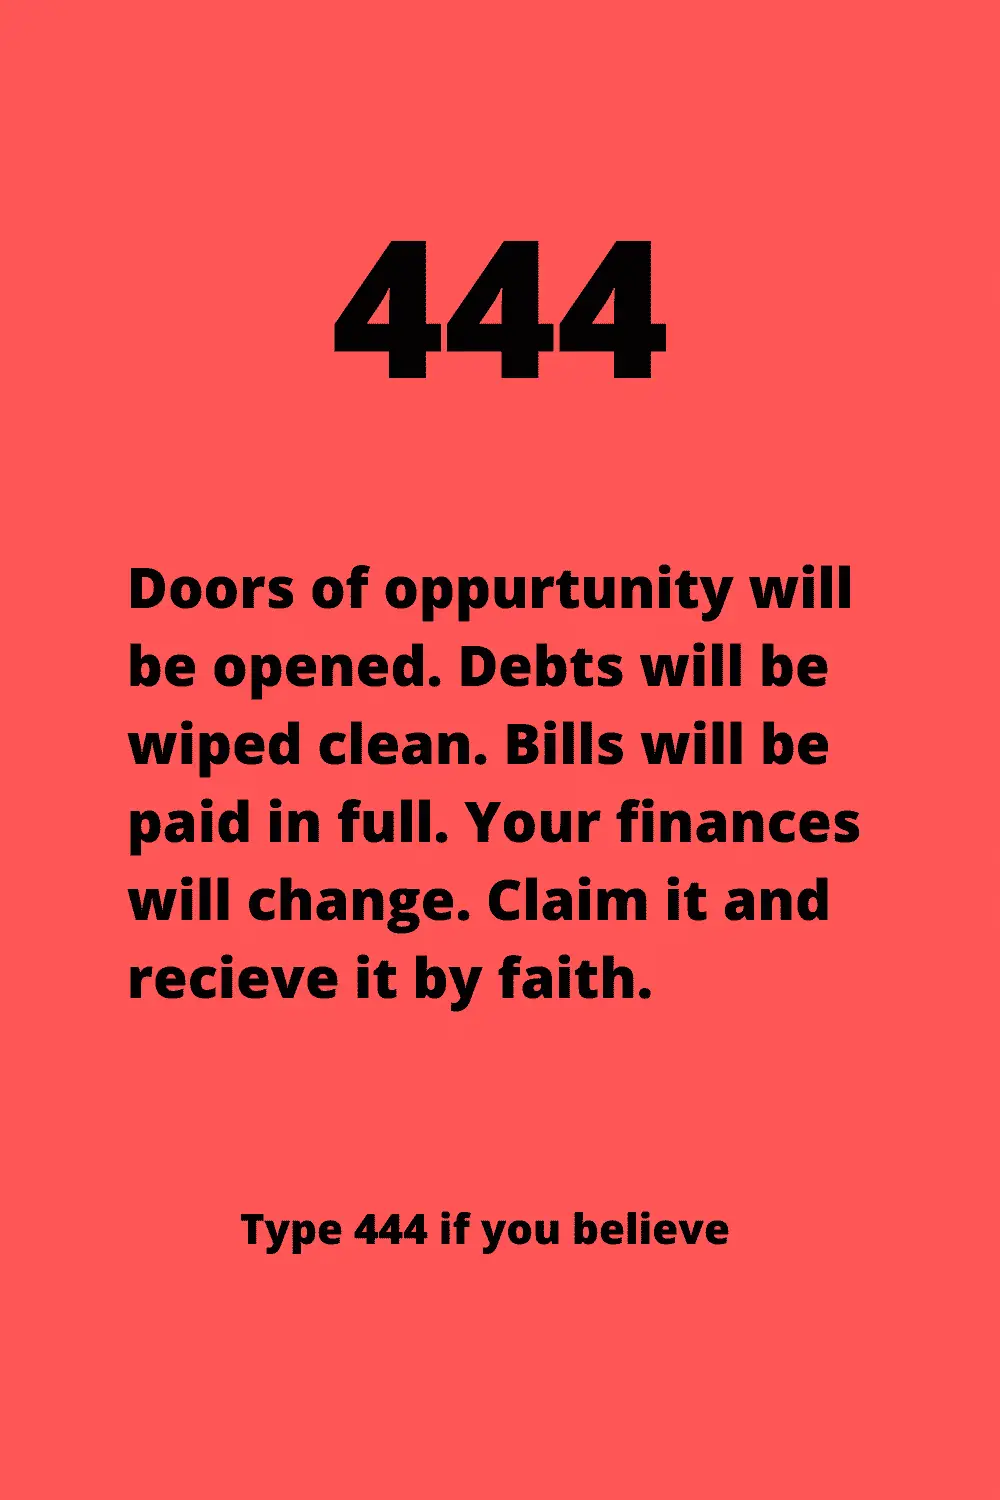 What Does 444 Mean In Numerology?